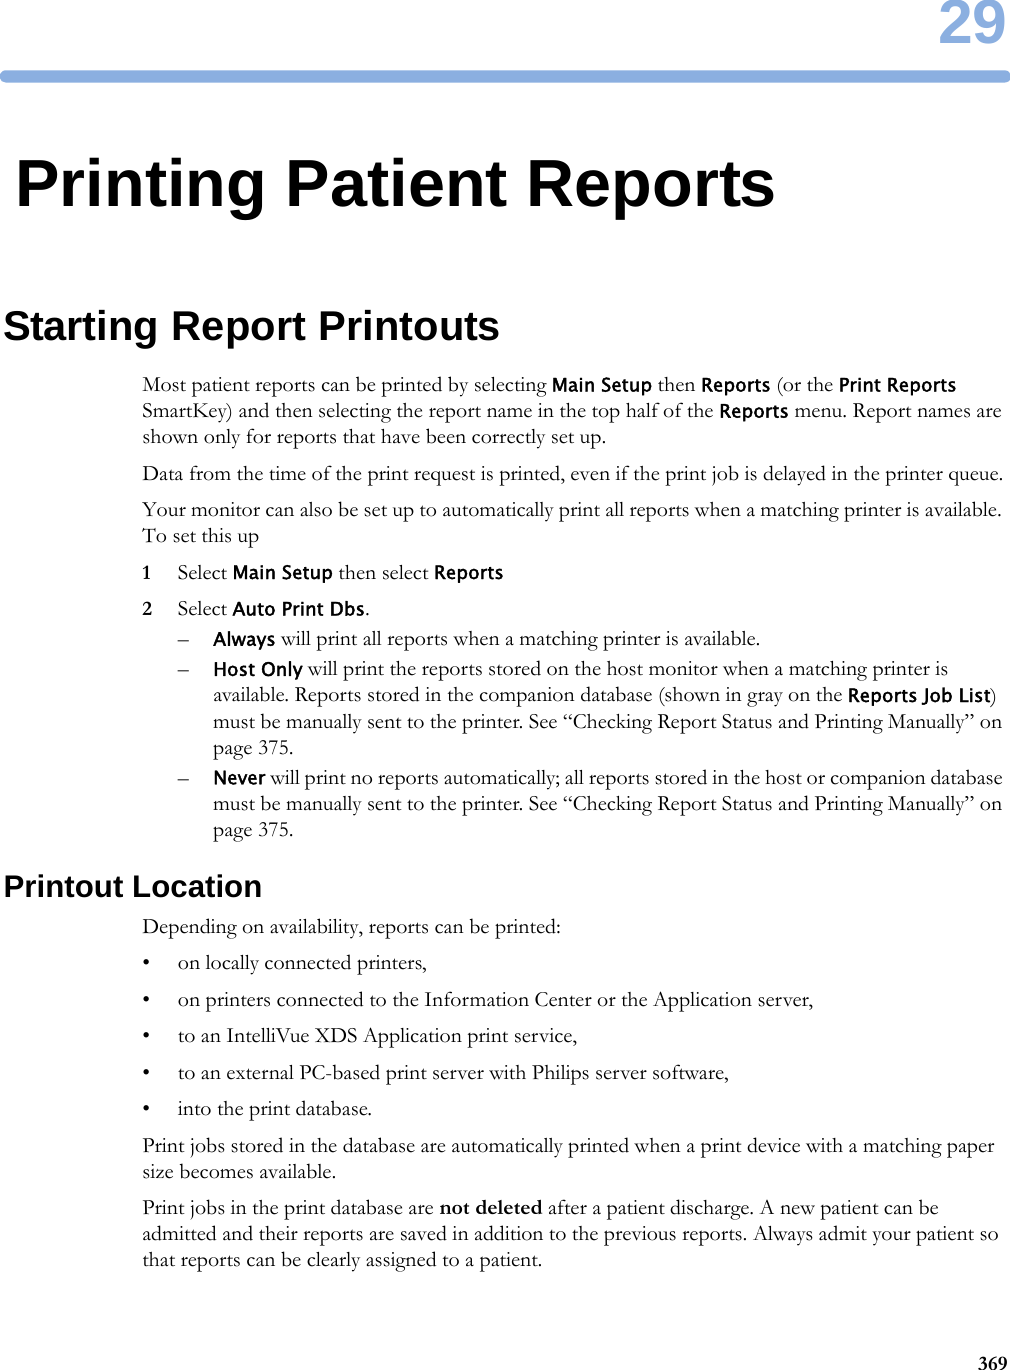 2936929Printing Patient ReportsStarting Report PrintoutsMost patient reports can be printed by selecting Main Setup then Reports (or the Print Reports SmartKey) and then selecting the report name in the top half of the Reports menu. Report names are shown only for reports that have been correctly set up.Data from the time of the print request is printed, even if the print job is delayed in the printer queue.Your monitor can also be set up to automatically print all reports when a matching printer is available. To set this up1Select Main Setup then select Reports2Select Auto Print Dbs.–Always will print all reports when a matching printer is available.–Host Only will print the reports stored on the host monitor when a matching printer is available. Reports stored in the companion database (shown in gray on the Reports Job List) must be manually sent to the printer. See “Checking Report Status and Printing Manually” on page 375.–Never will print no reports automatically; all reports stored in the host or companion database must be manually sent to the printer. See “Checking Report Status and Printing Manually” on page 375.Printout LocationDepending on availability, reports can be printed:• on locally connected printers,• on printers connected to the Information Center or the Application server,• to an IntelliVue XDS Application print service,• to an external PC-based print server with Philips server software,• into the print database.Print jobs stored in the database are automatically printed when a print device with a matching paper size becomes available.Print jobs in the print database are not deleted after a patient discharge. A new patient can be admitted and their reports are saved in addition to the previous reports. Always admit your patient so that reports can be clearly assigned to a patient.